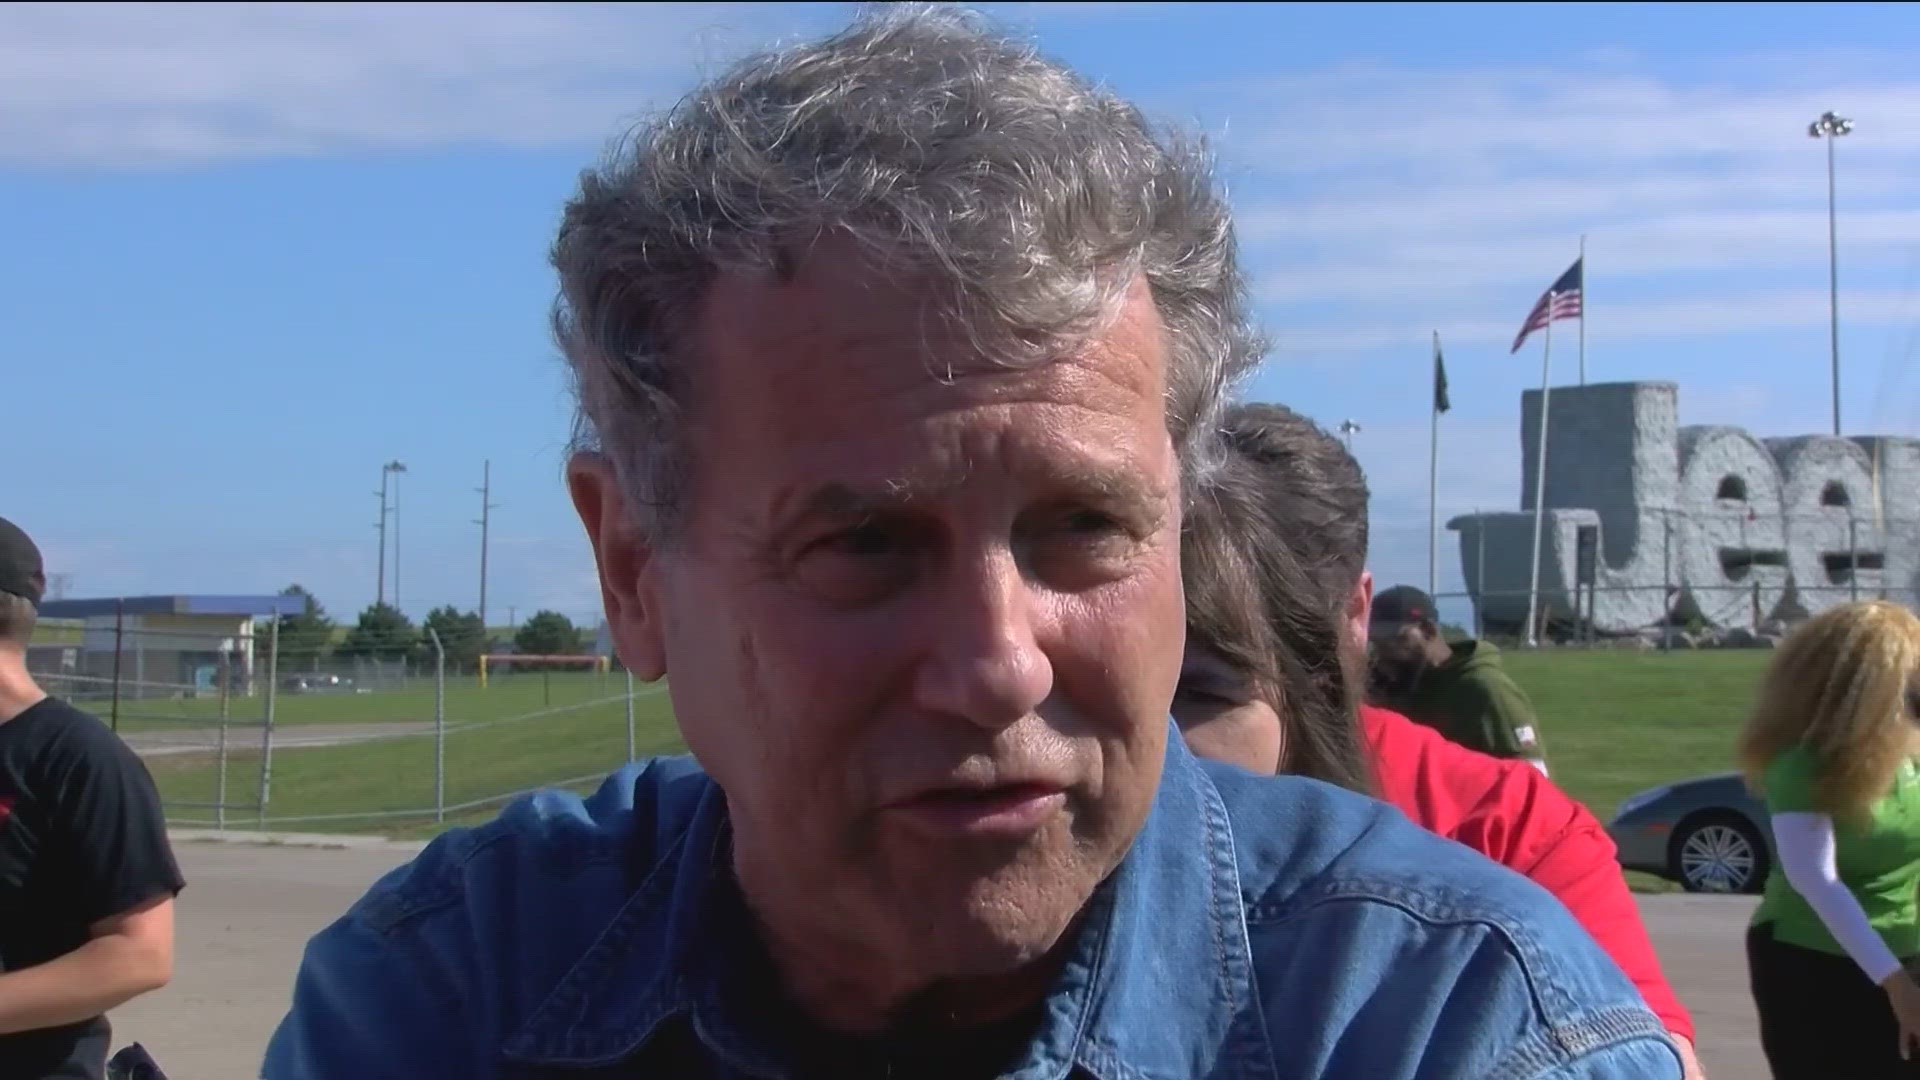 Day one of the strike at Toledo's Jeep plant included a visit from U.S. Sen. Sherrod Brown, who urged the company to make a better offer to striking UAW workers.